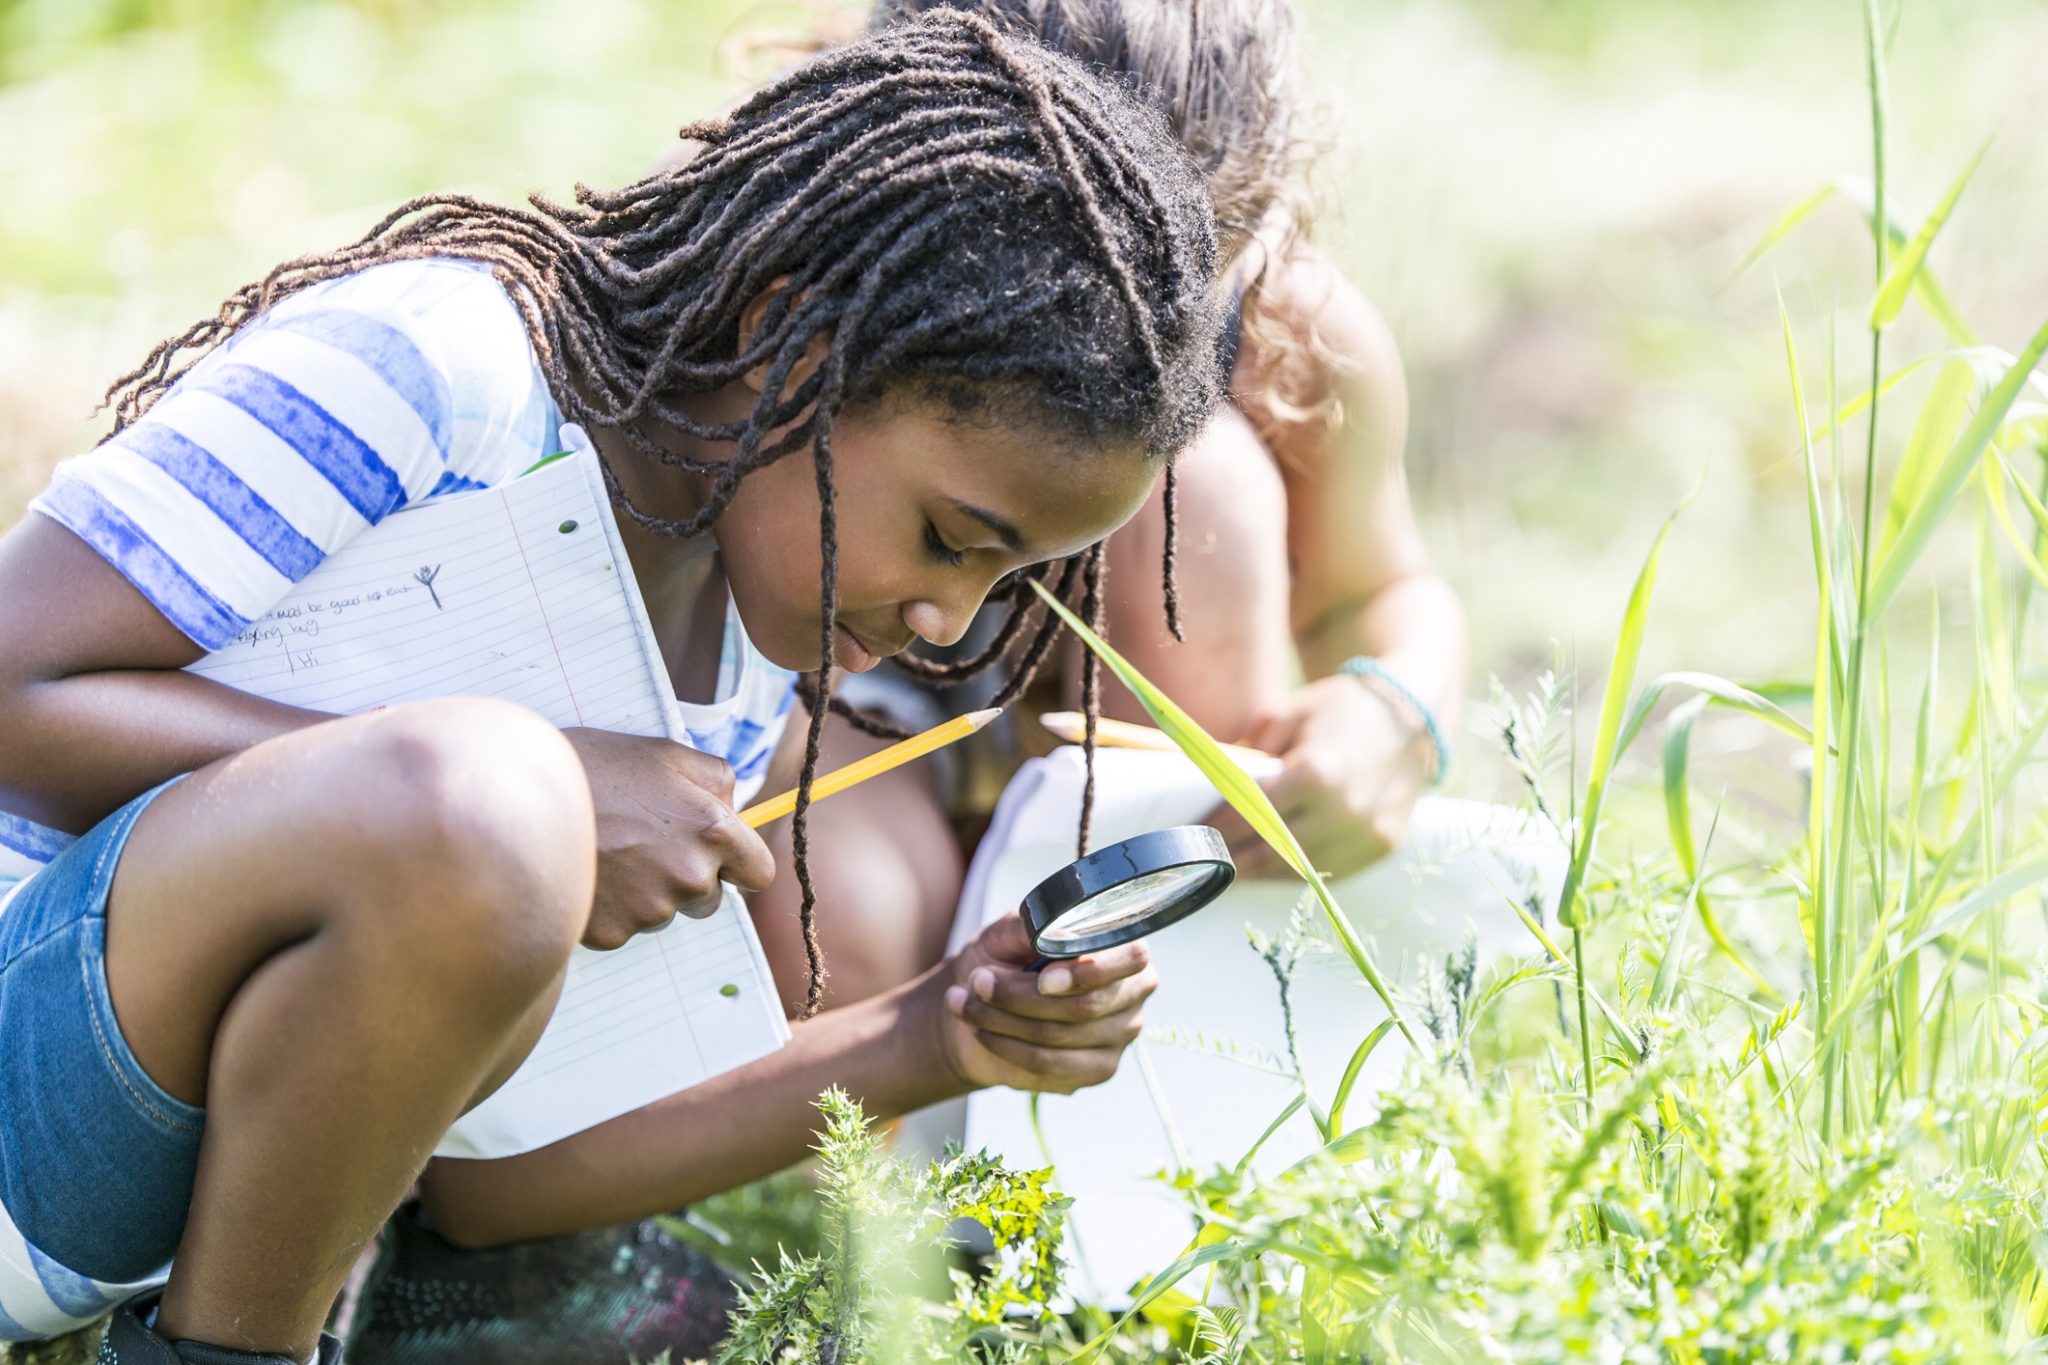 Everything you need to help your child become a nature detective